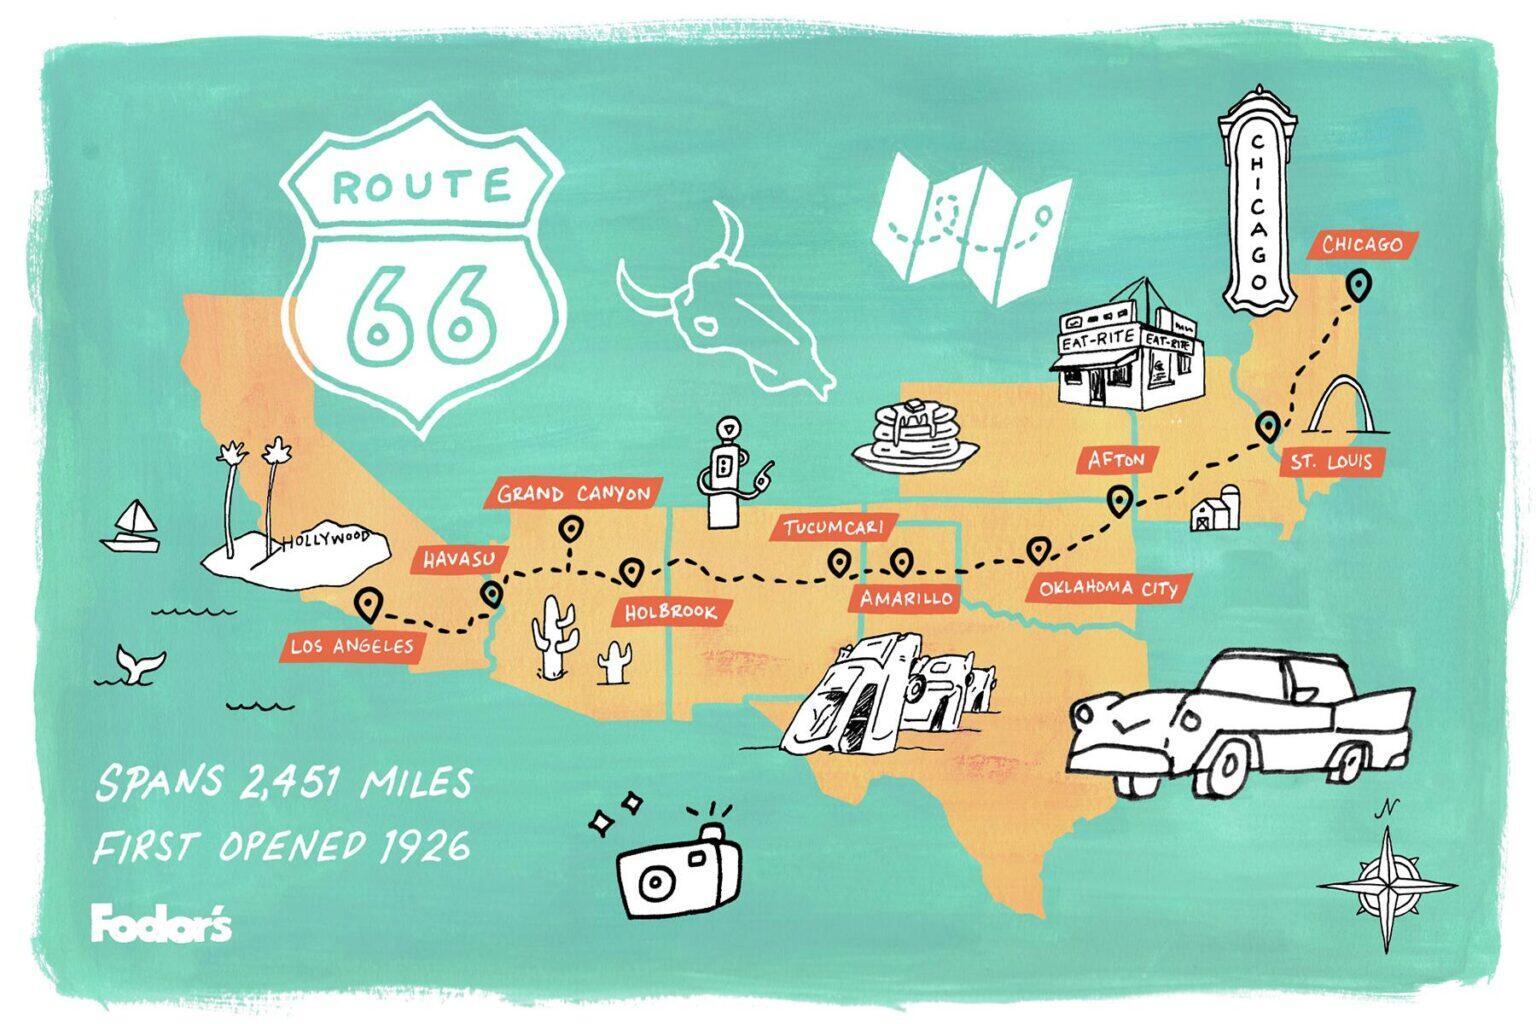 how to travel route 66 cheap